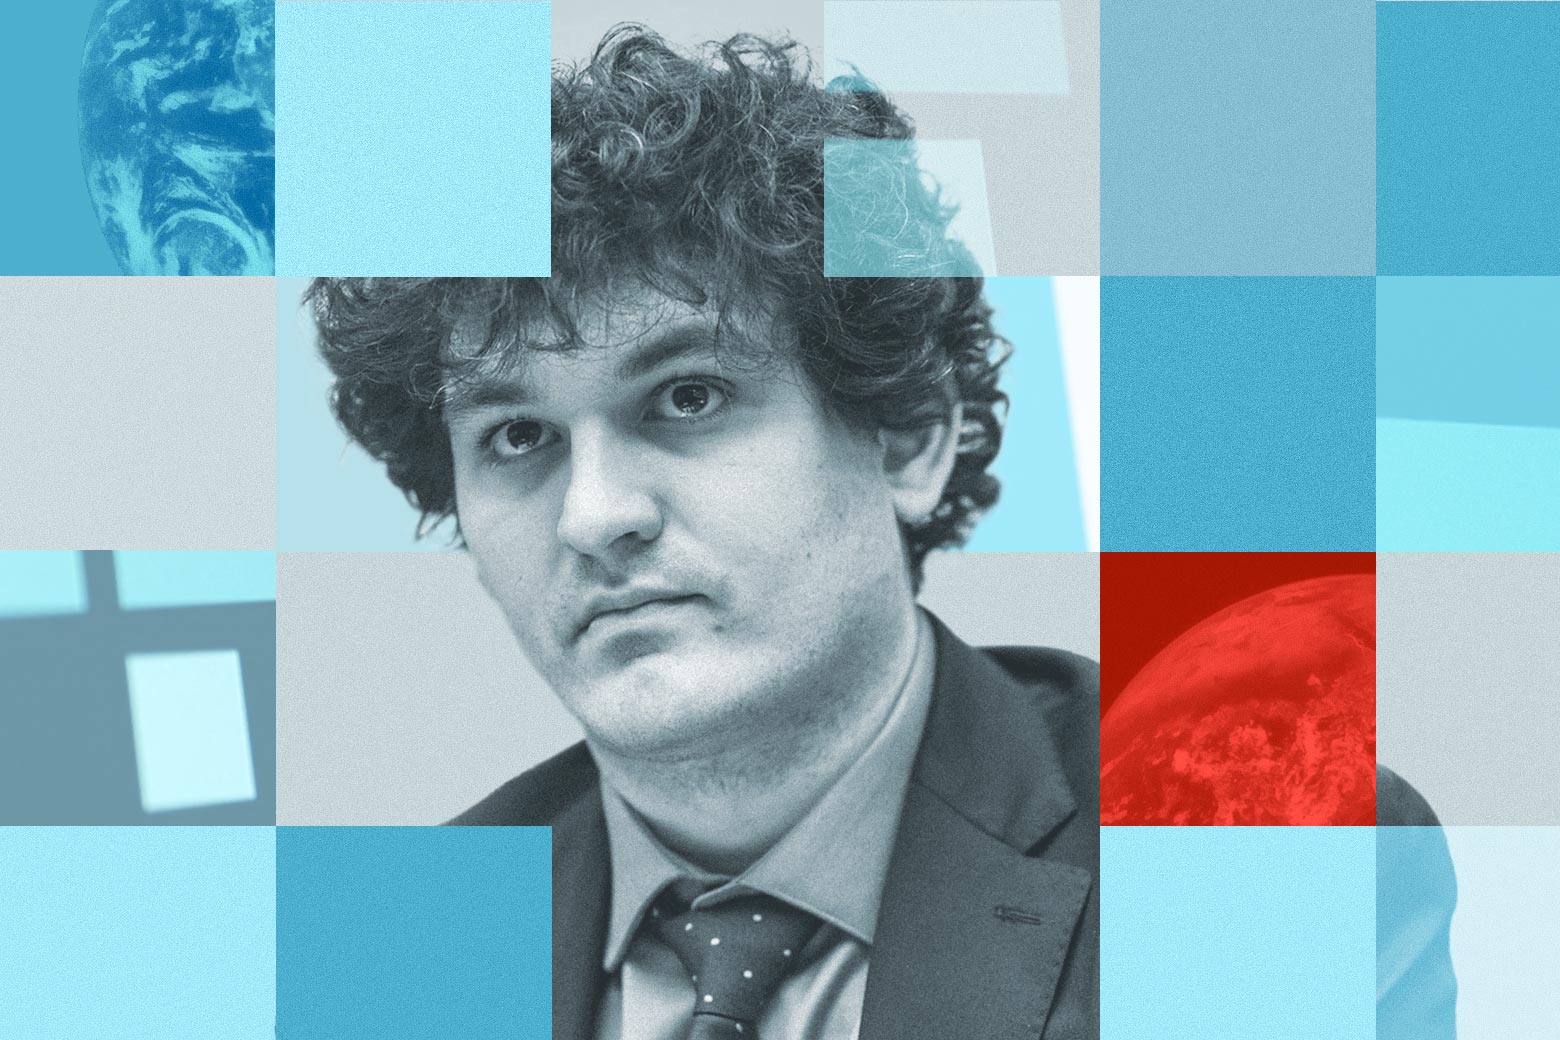 Red and blue tiles overlay a photograph of a man with curly hair in a suit.